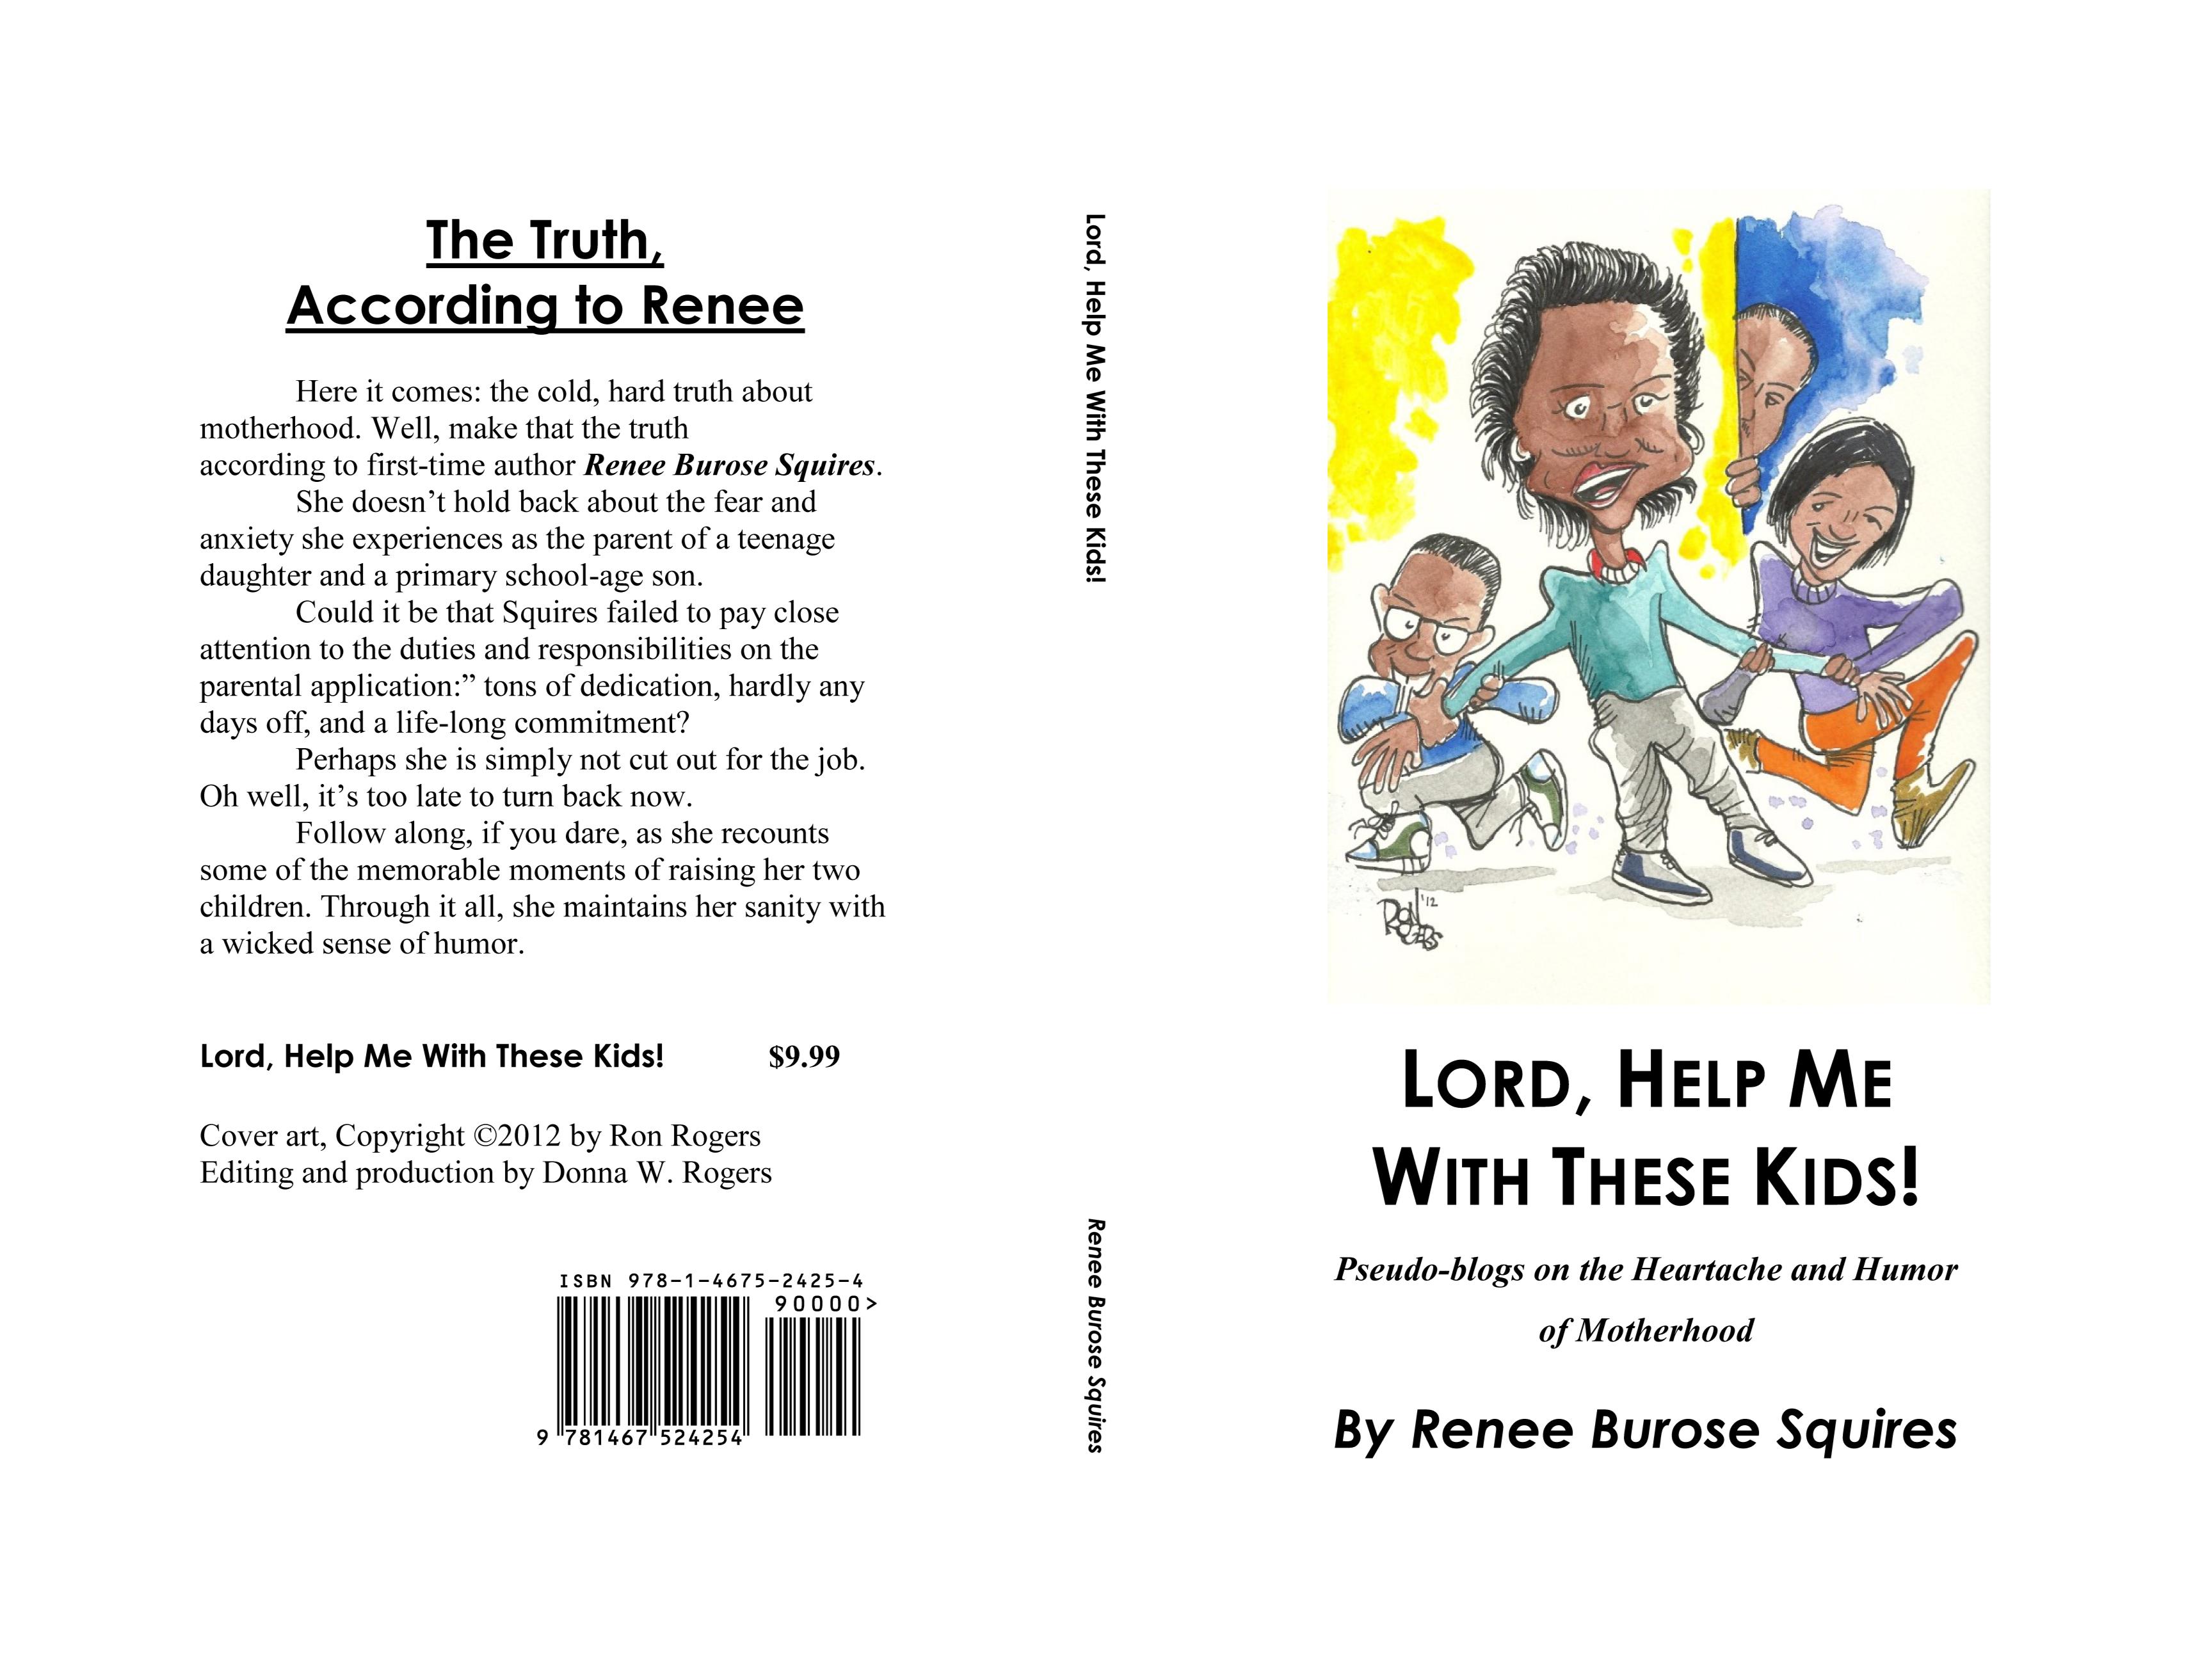 Lord, Help Me With These Kids! cover image